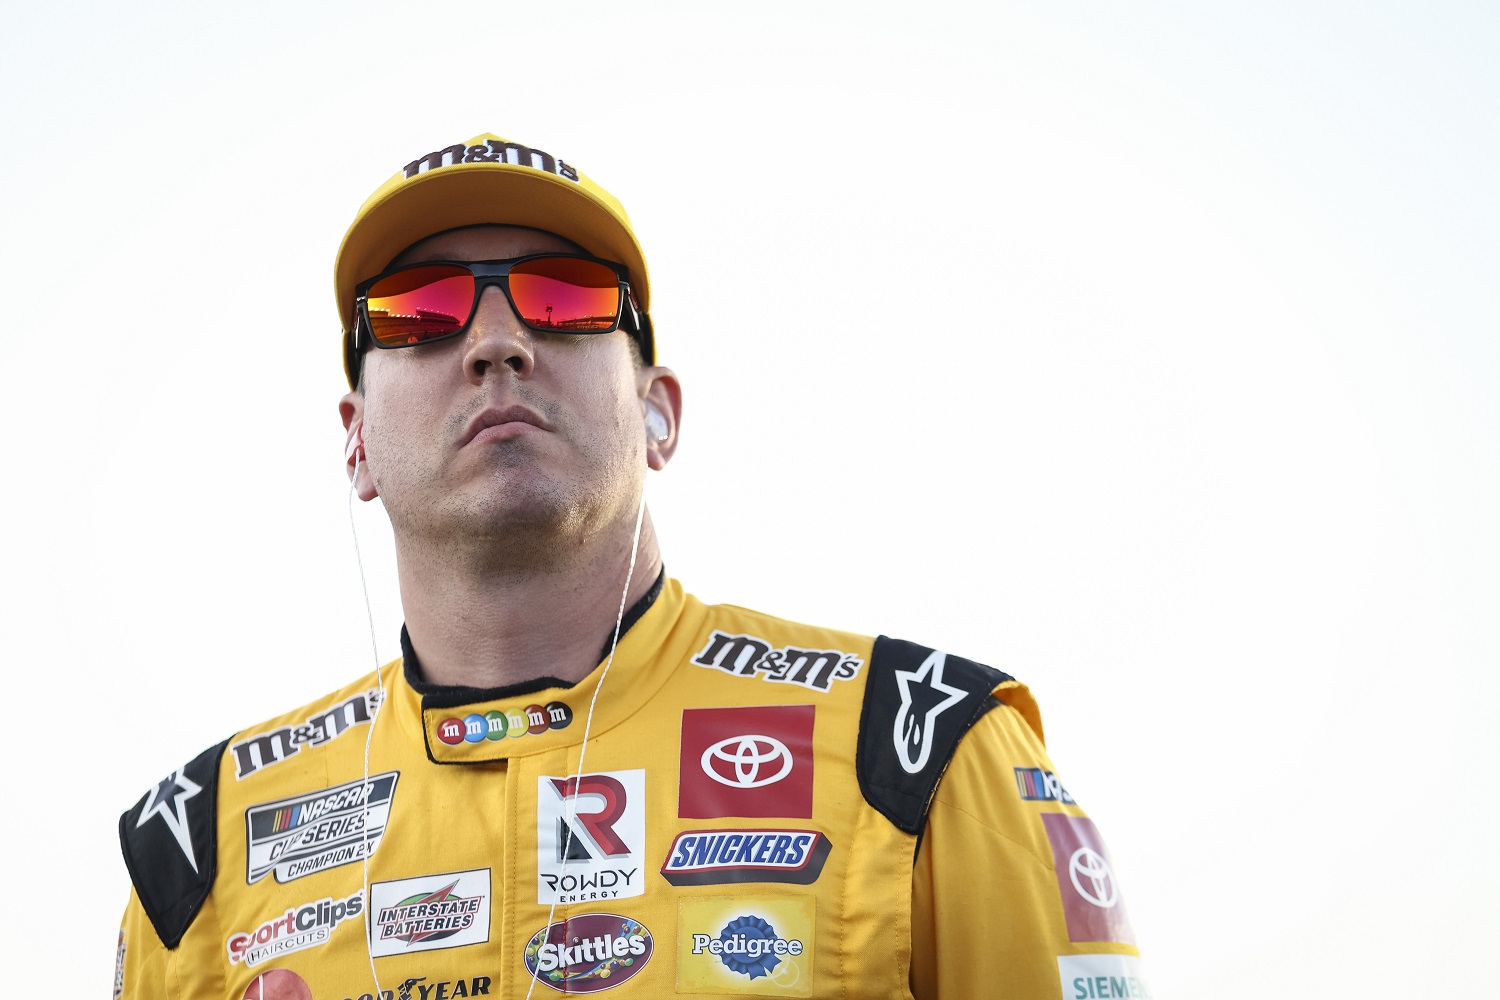 Kyle Busch looks on during practice for the NASCAR Cup Series Coca-Cola 600 at Charlotte Motor Speedway on May 28, 2022 in Concord, North Carolina.